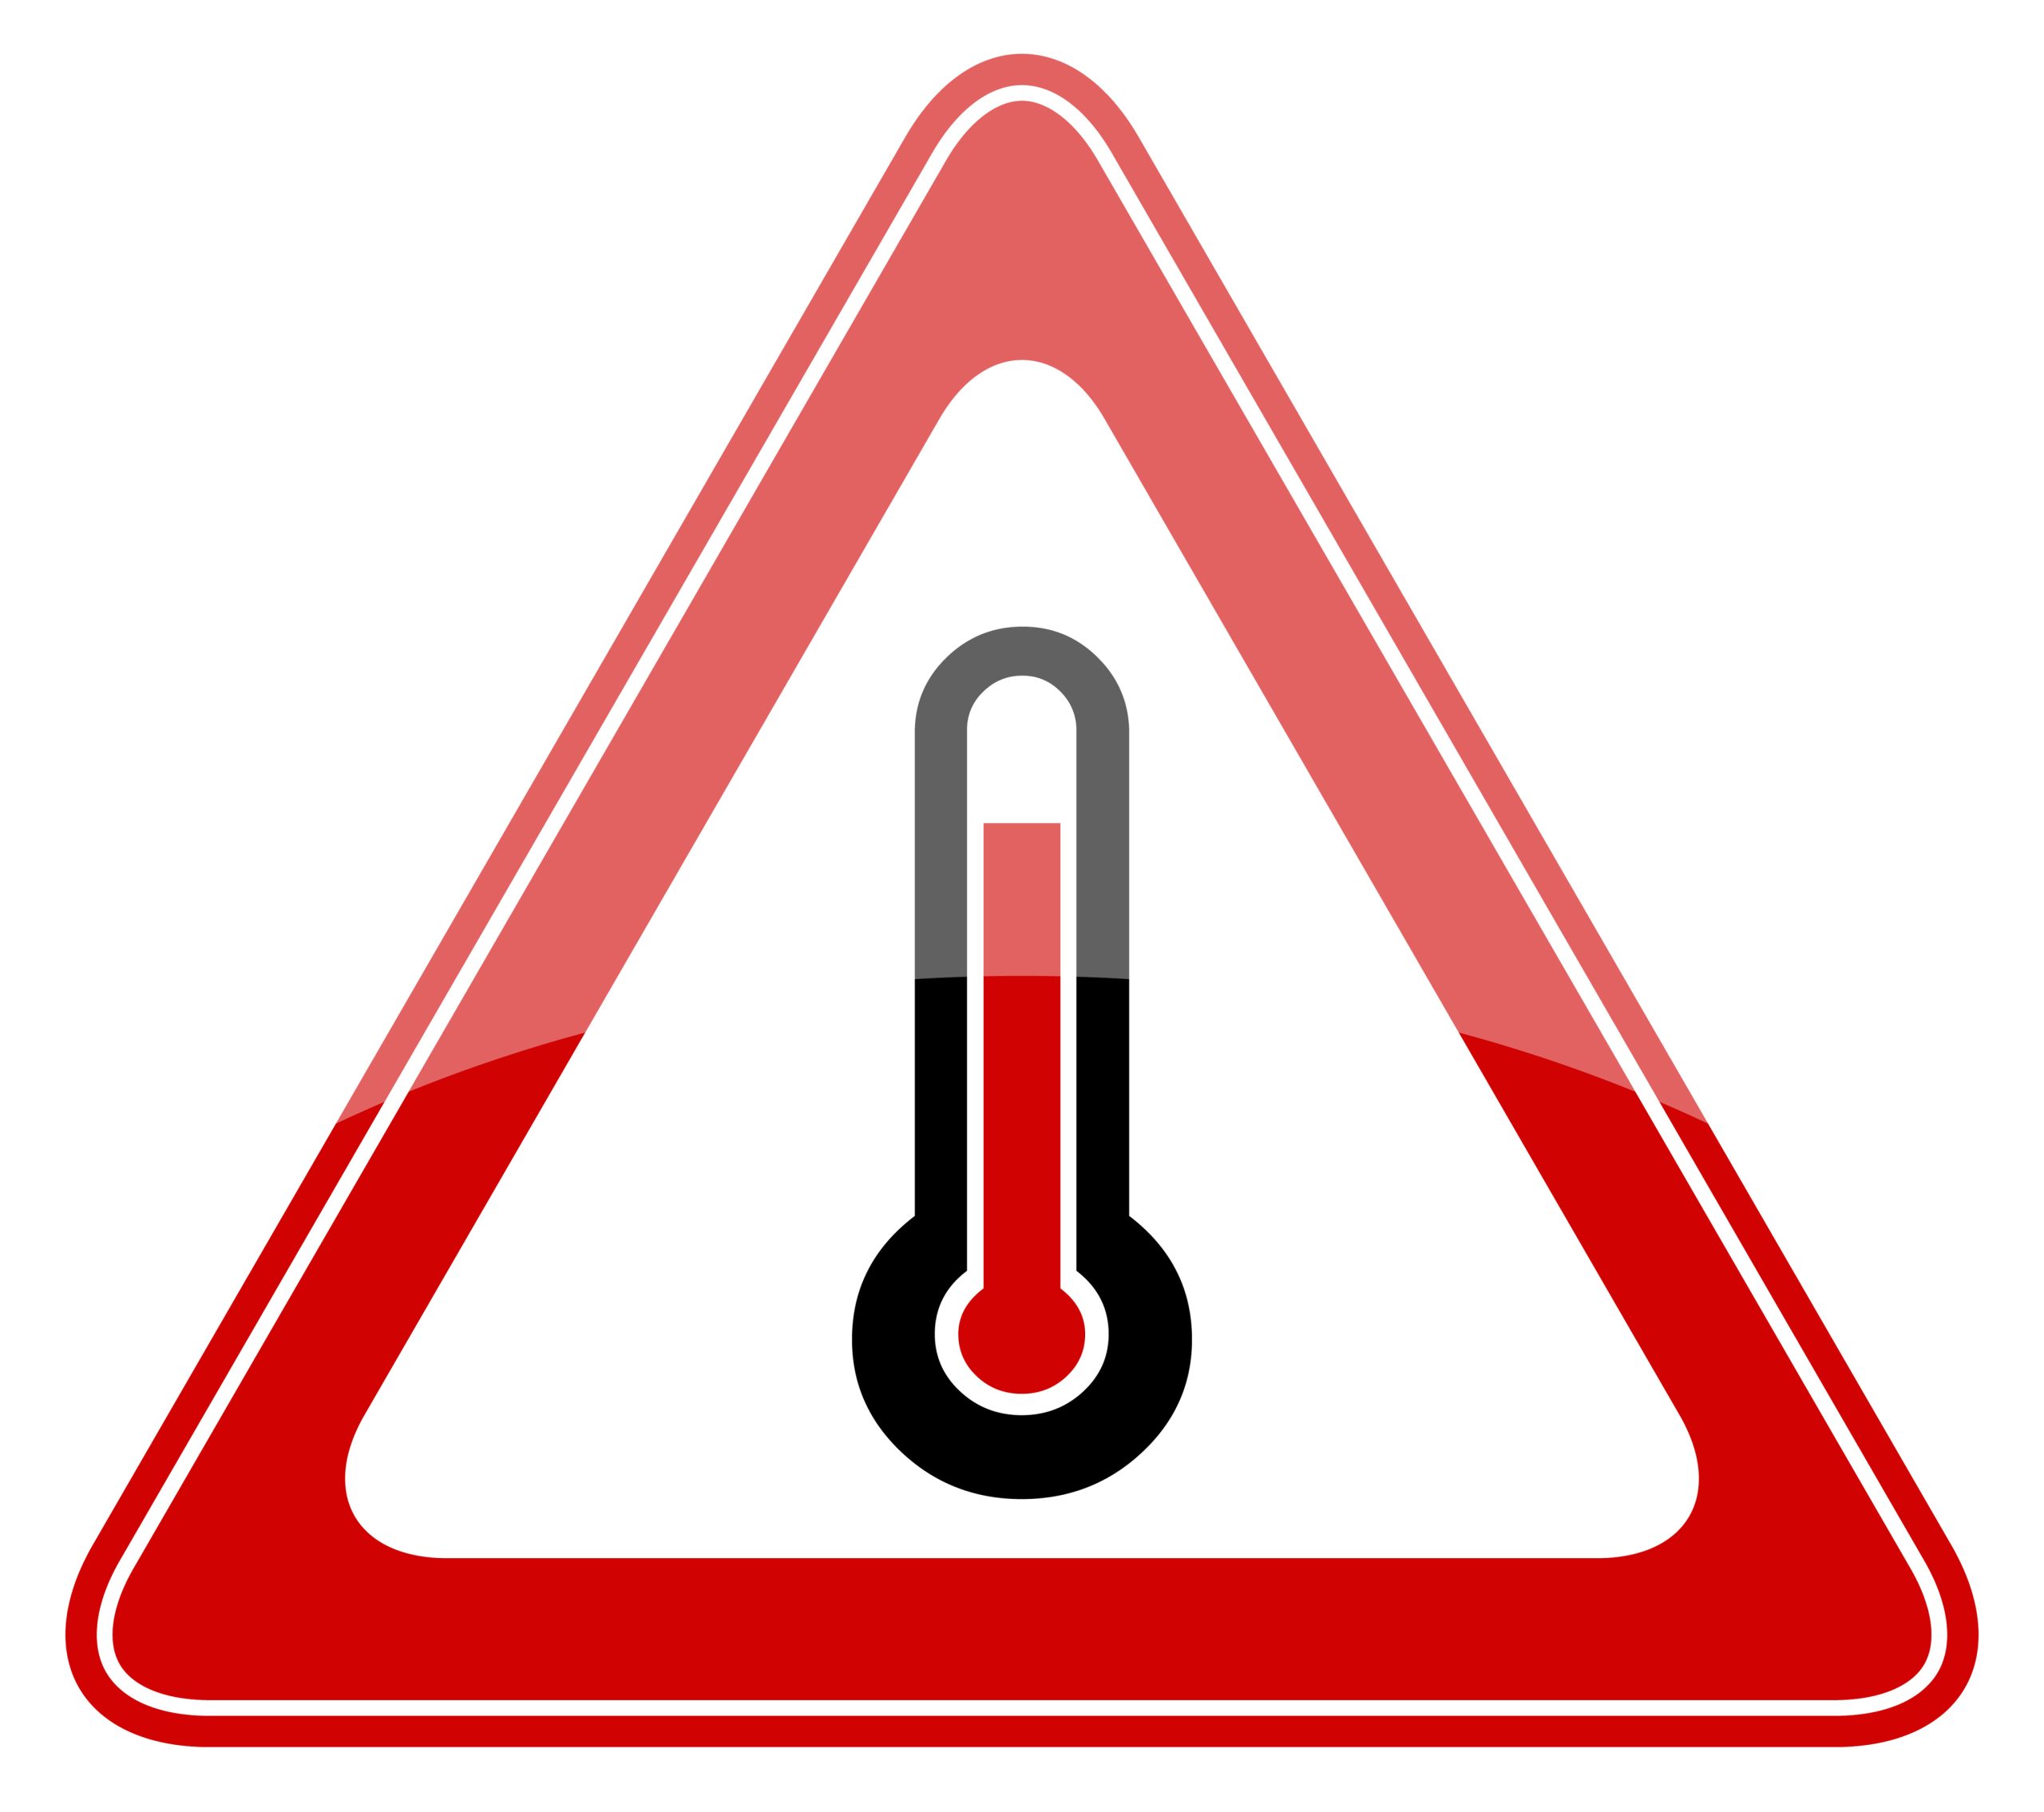 Overheating can occur for various reasons, such as overloading, poor connections, and insulation breakdown.